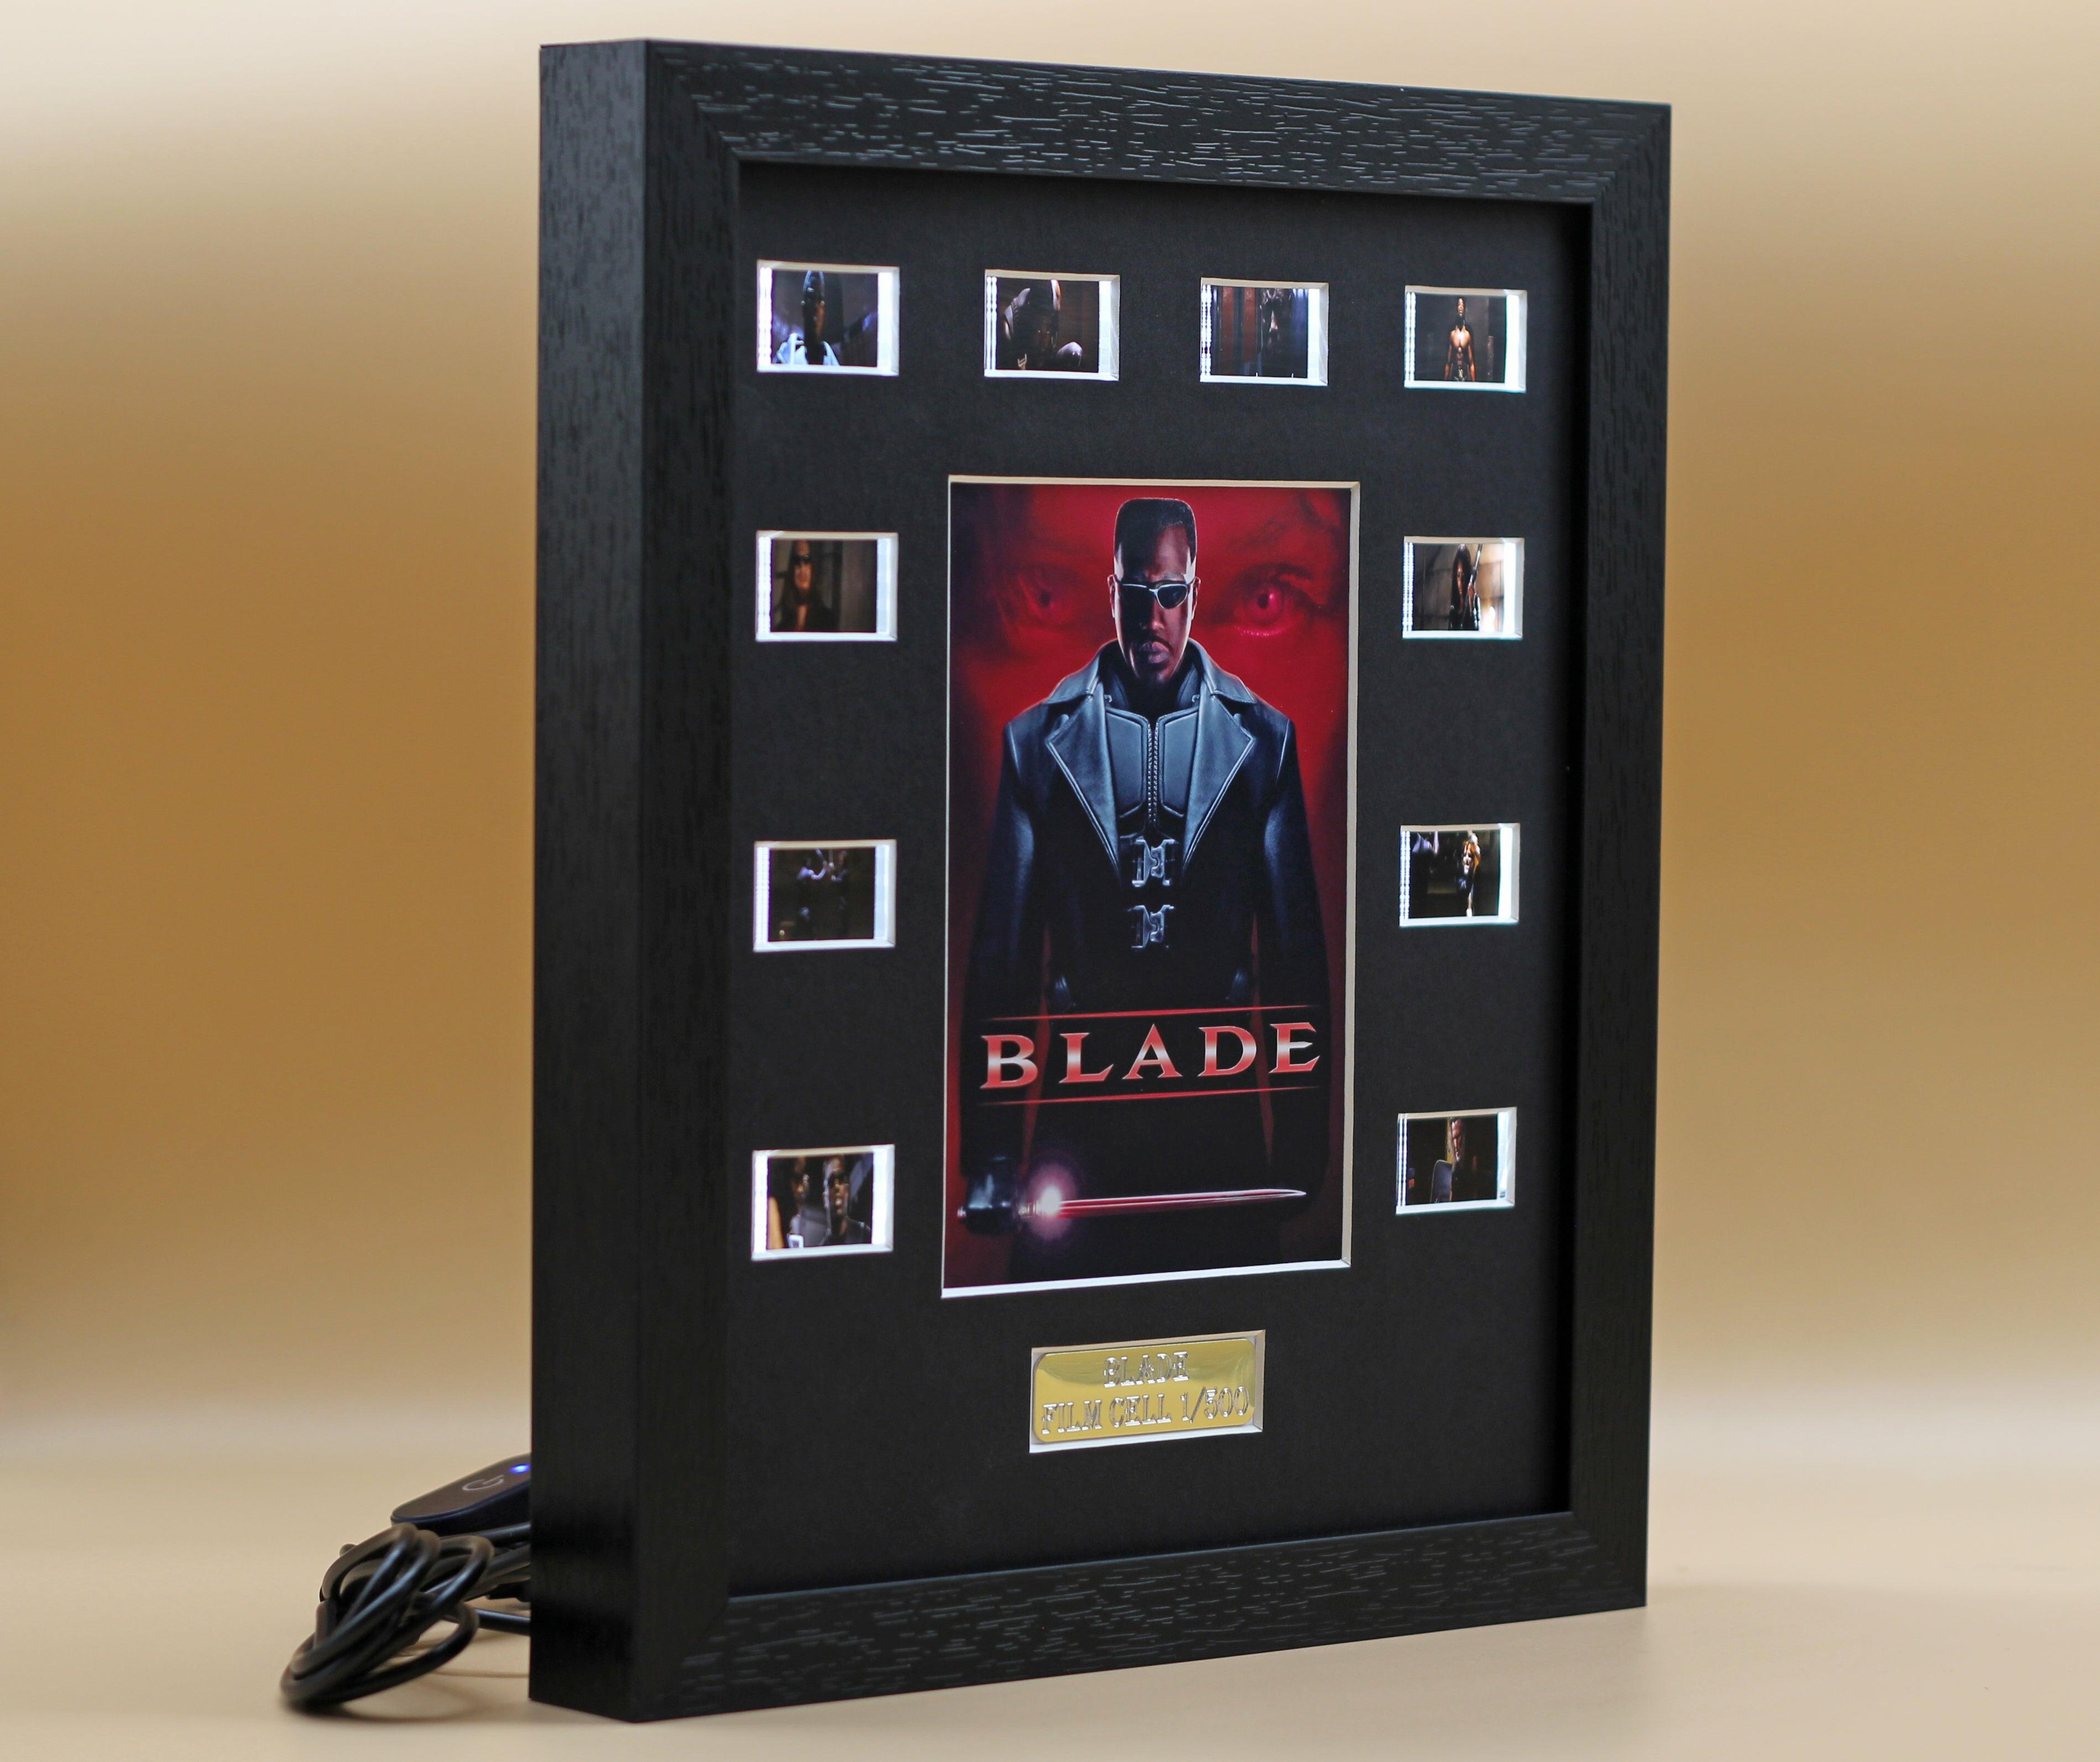 Blade film cell